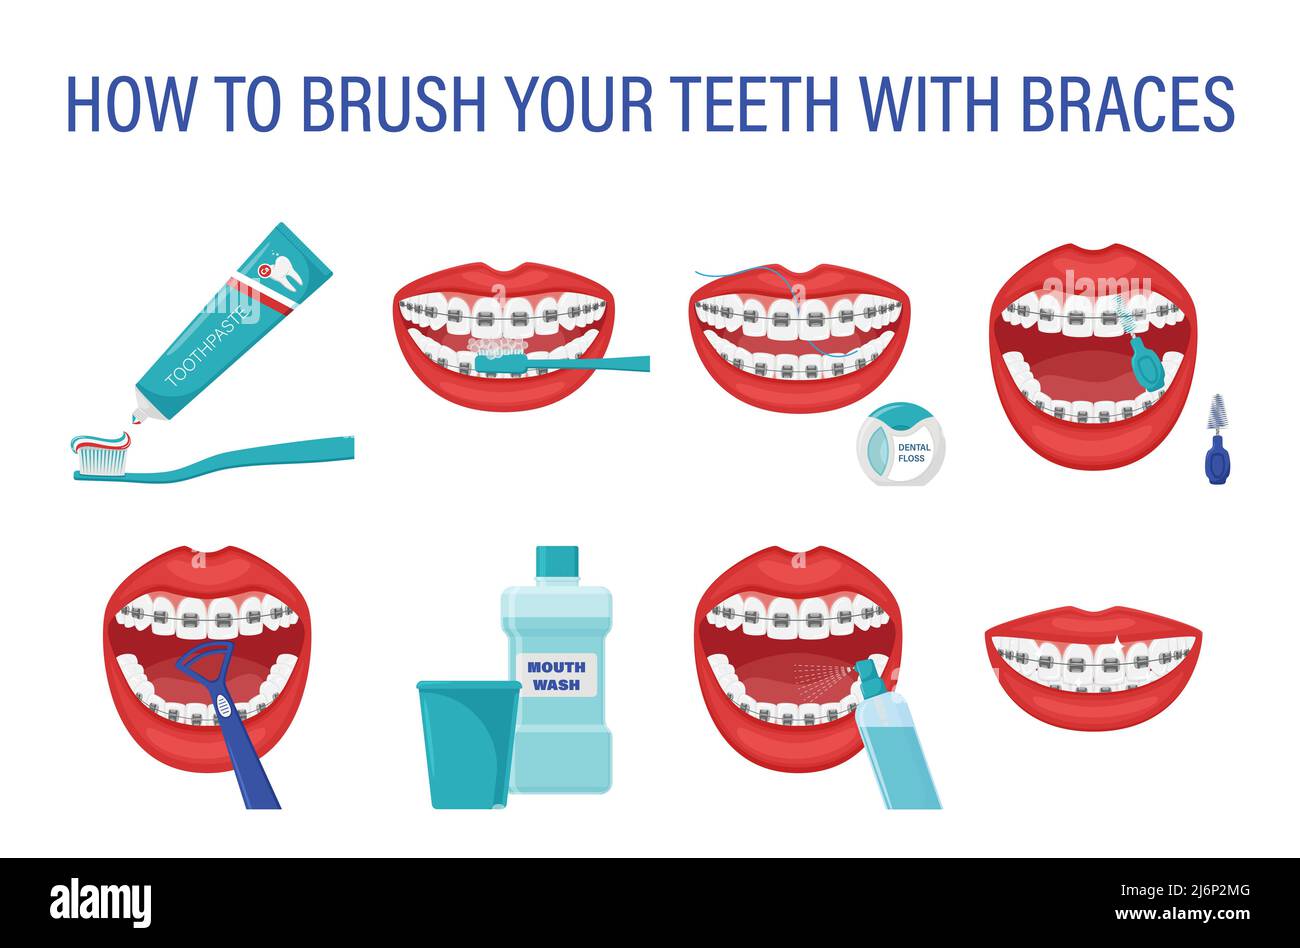 Infographic how to brush your teeth with braces. Step-by-step instructions. Oral hygiene. Healthy lifestyle and dental care. Clean white teeth. Preven Stock Vector